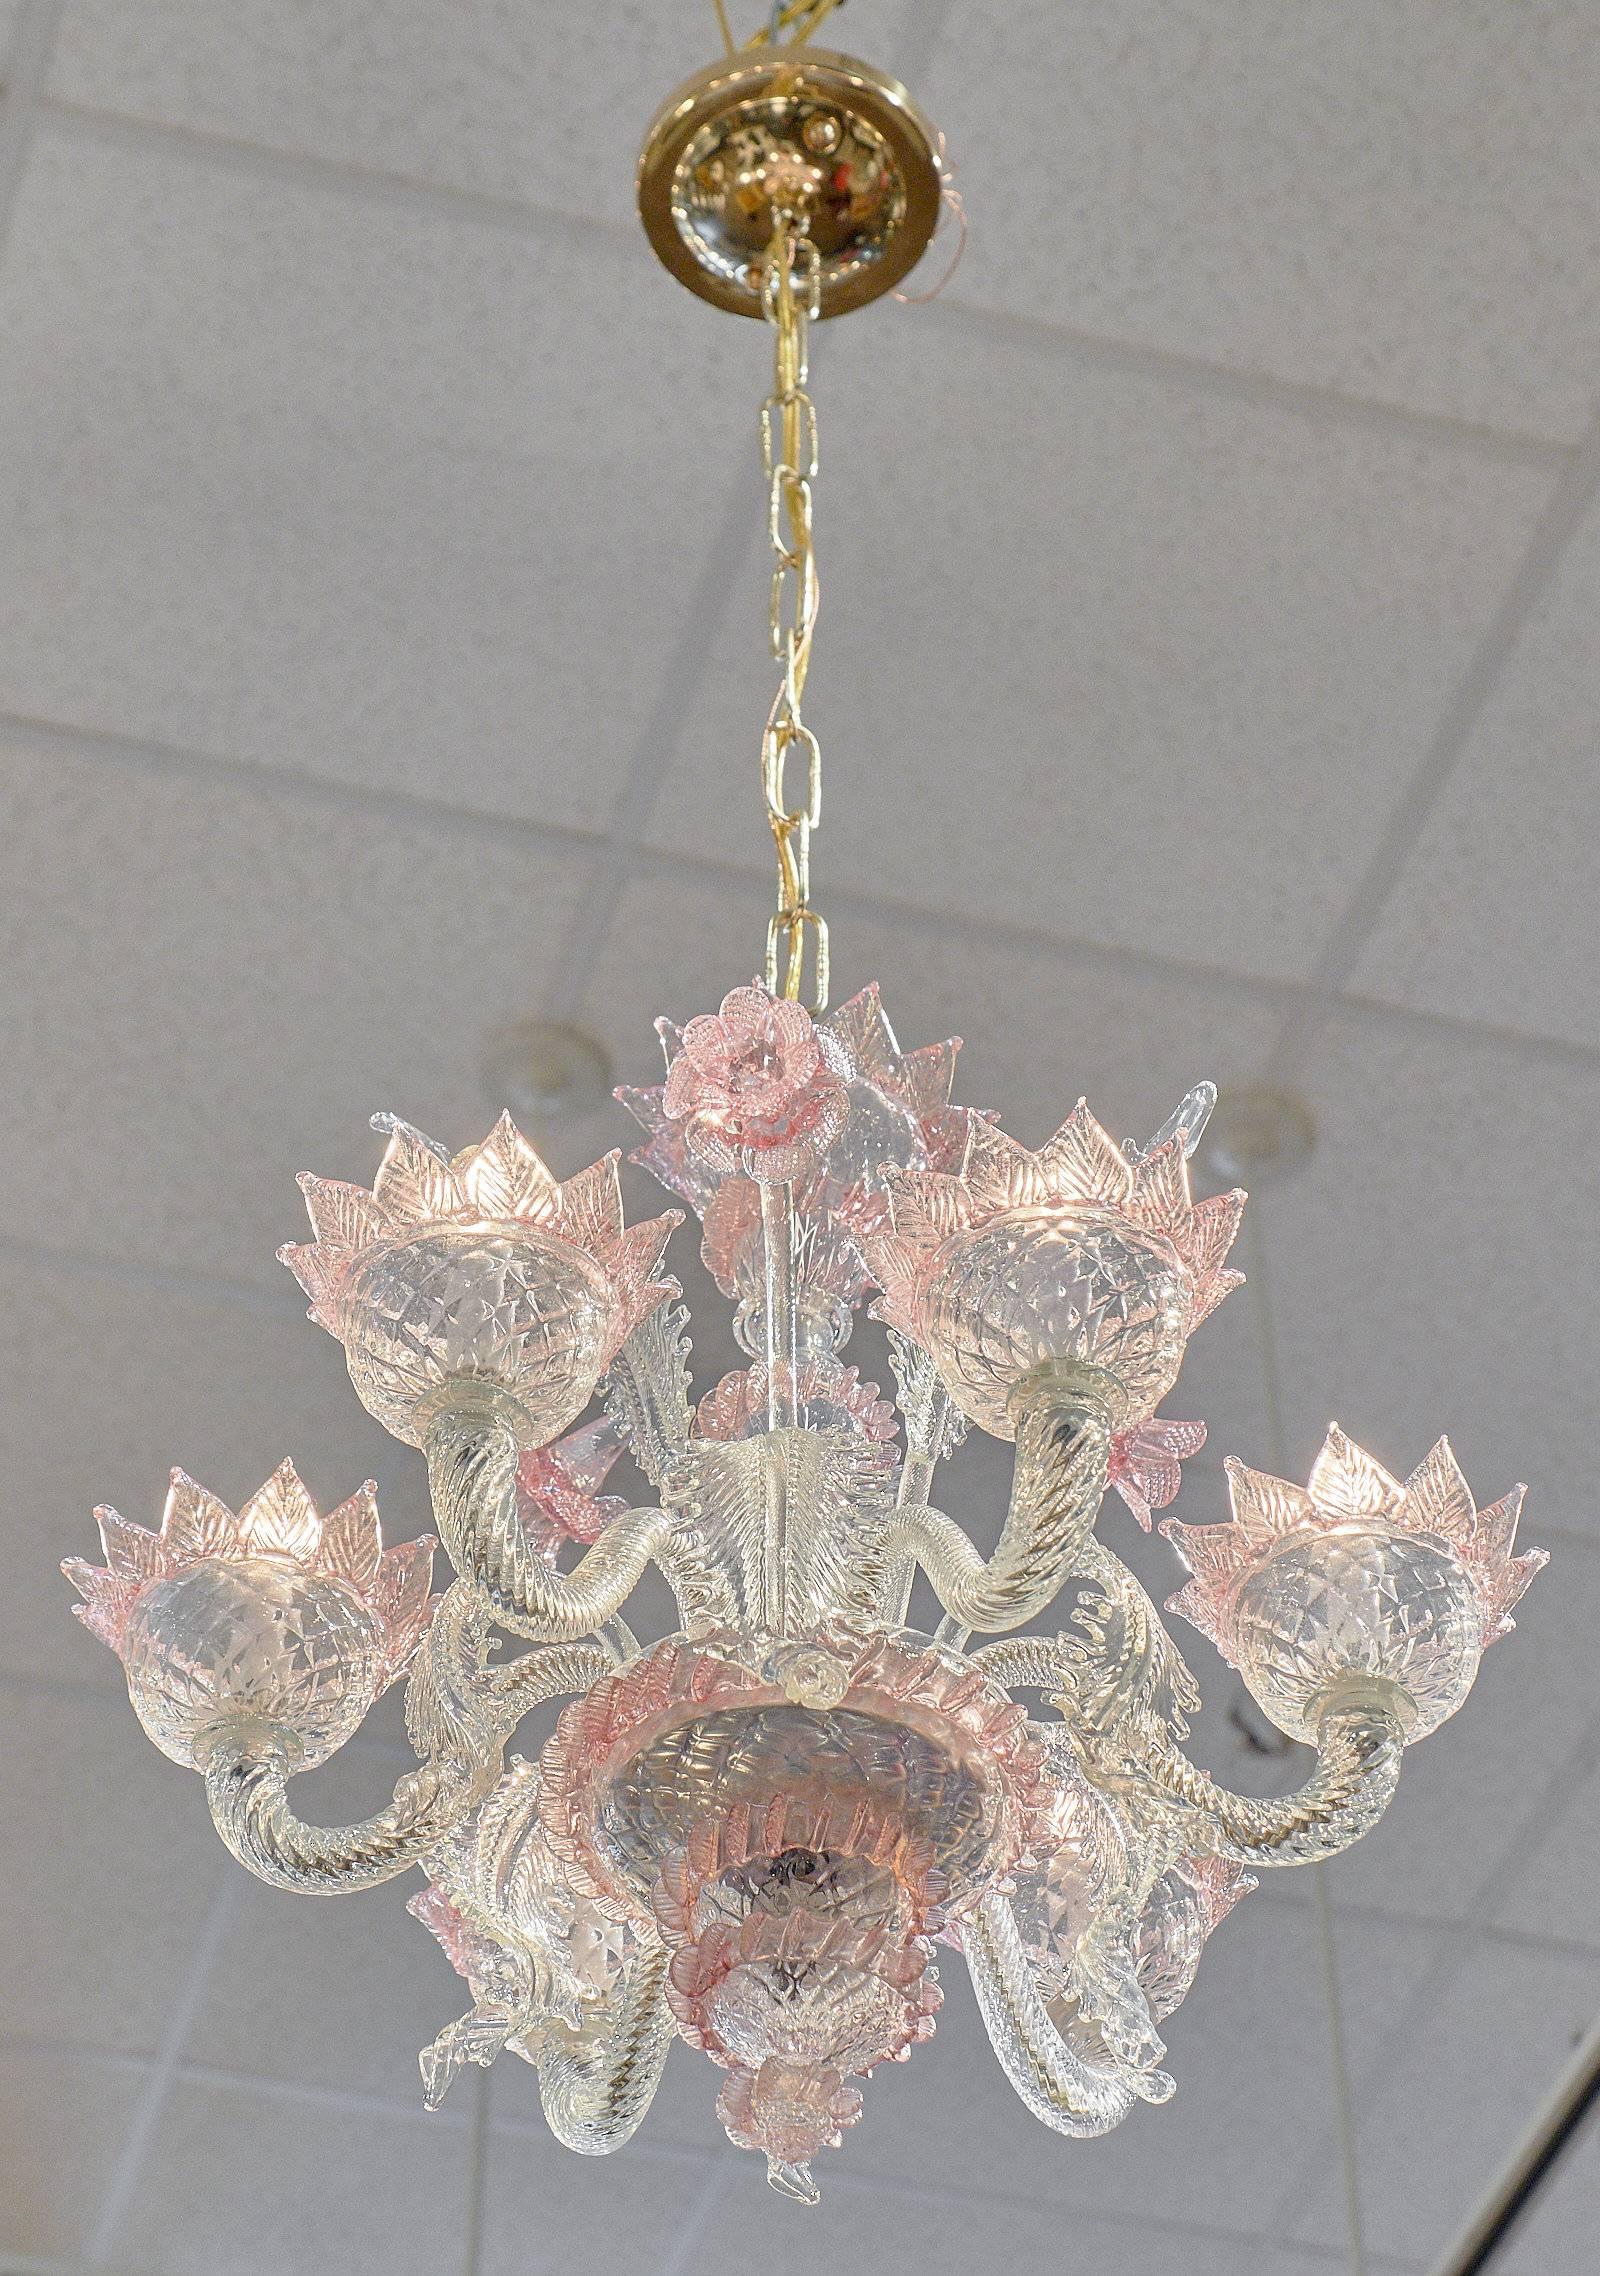 An antique Venetian chandelier in pink and clear crystal with six branches and leaves. This fixture has been wired to fit US standards.